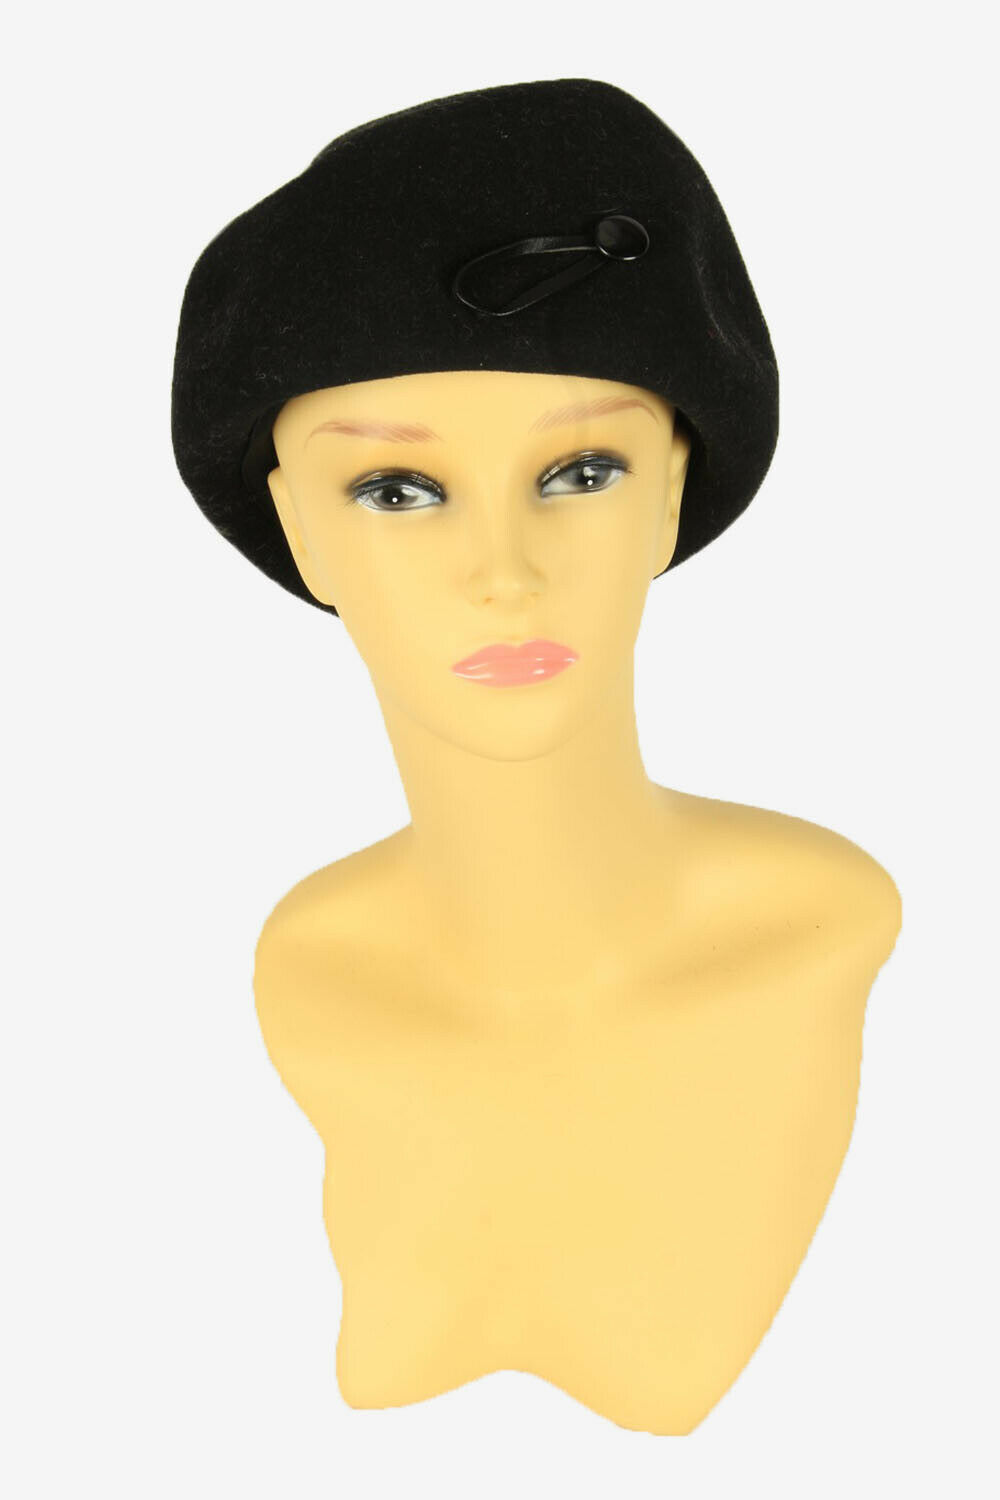 https://peppertreelondon.co.uk/wp-content/uploads/imported/9/Beret-Vintage-Hat-Classic-Country-90s-Retro-Black-Size-60-cm-HAT2264-265406475059.jpg